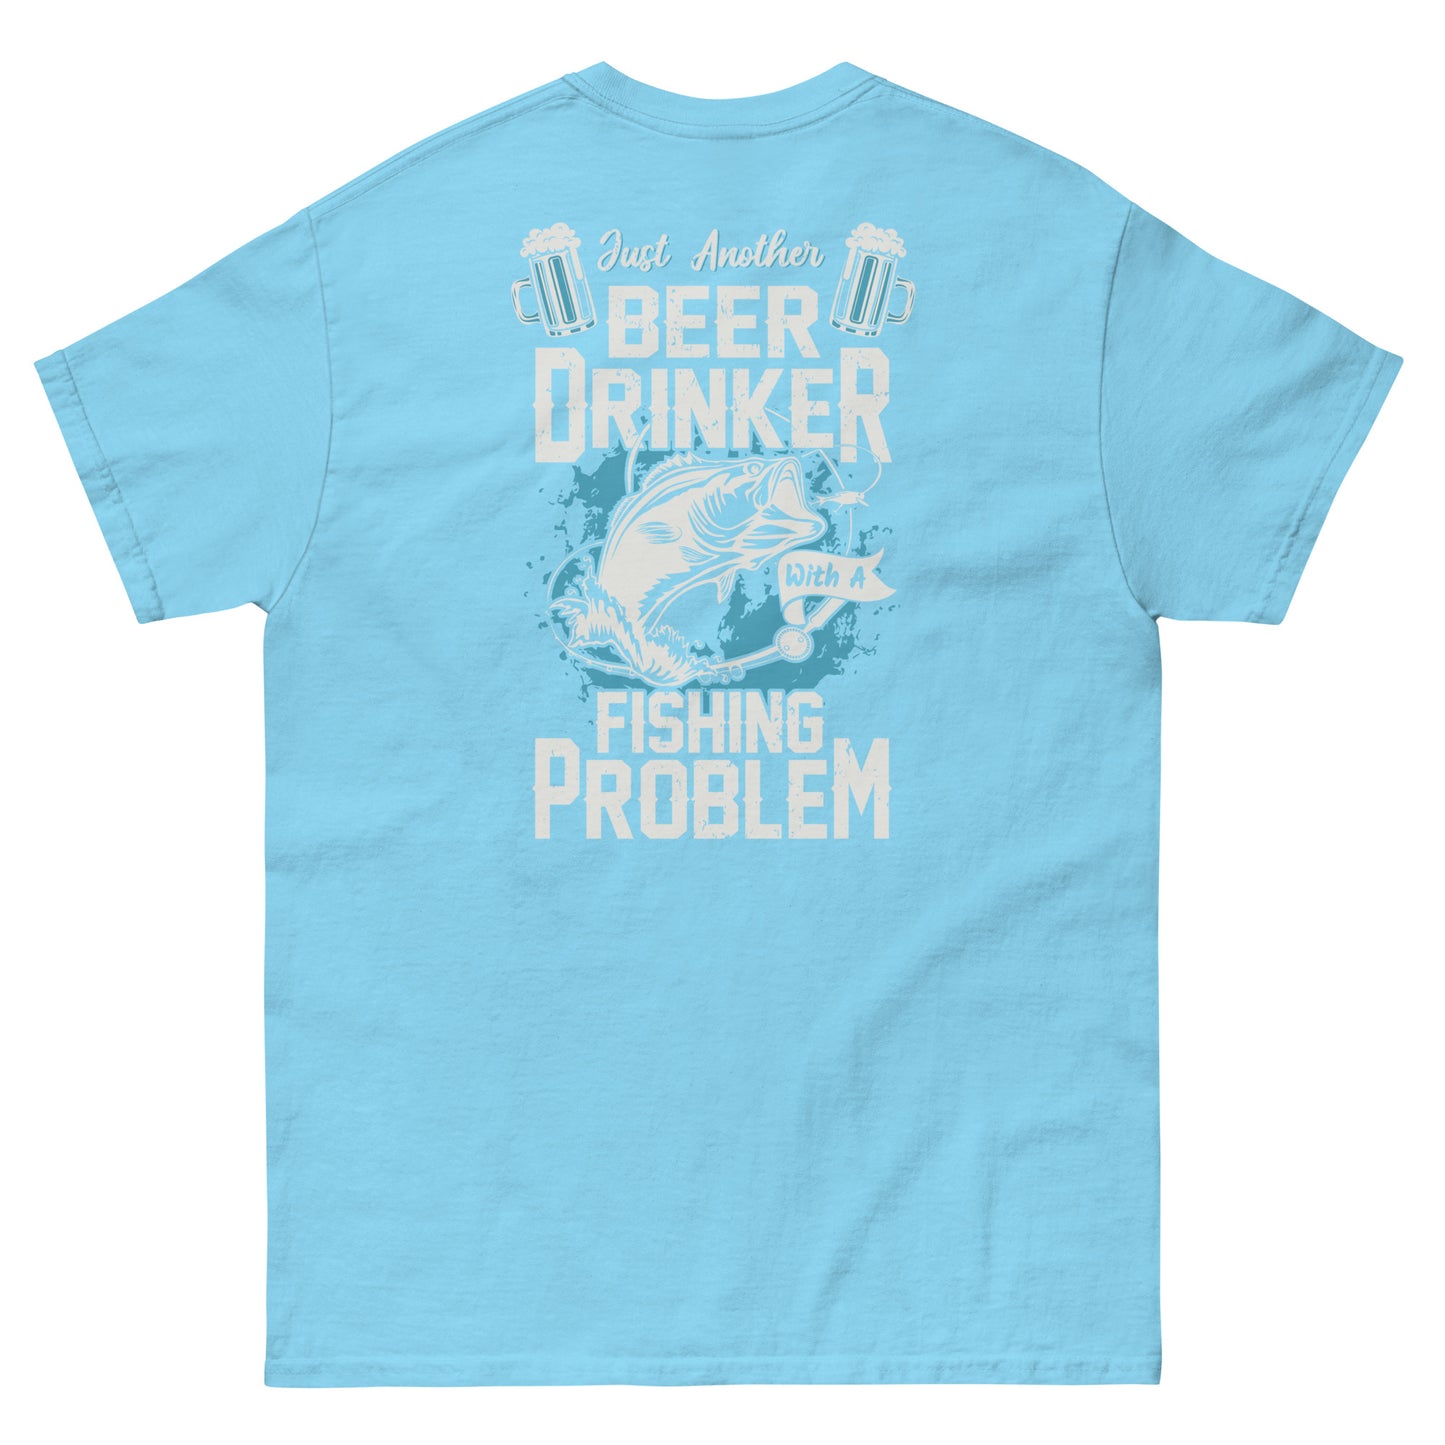 SC Beer drinker with fishing problem T